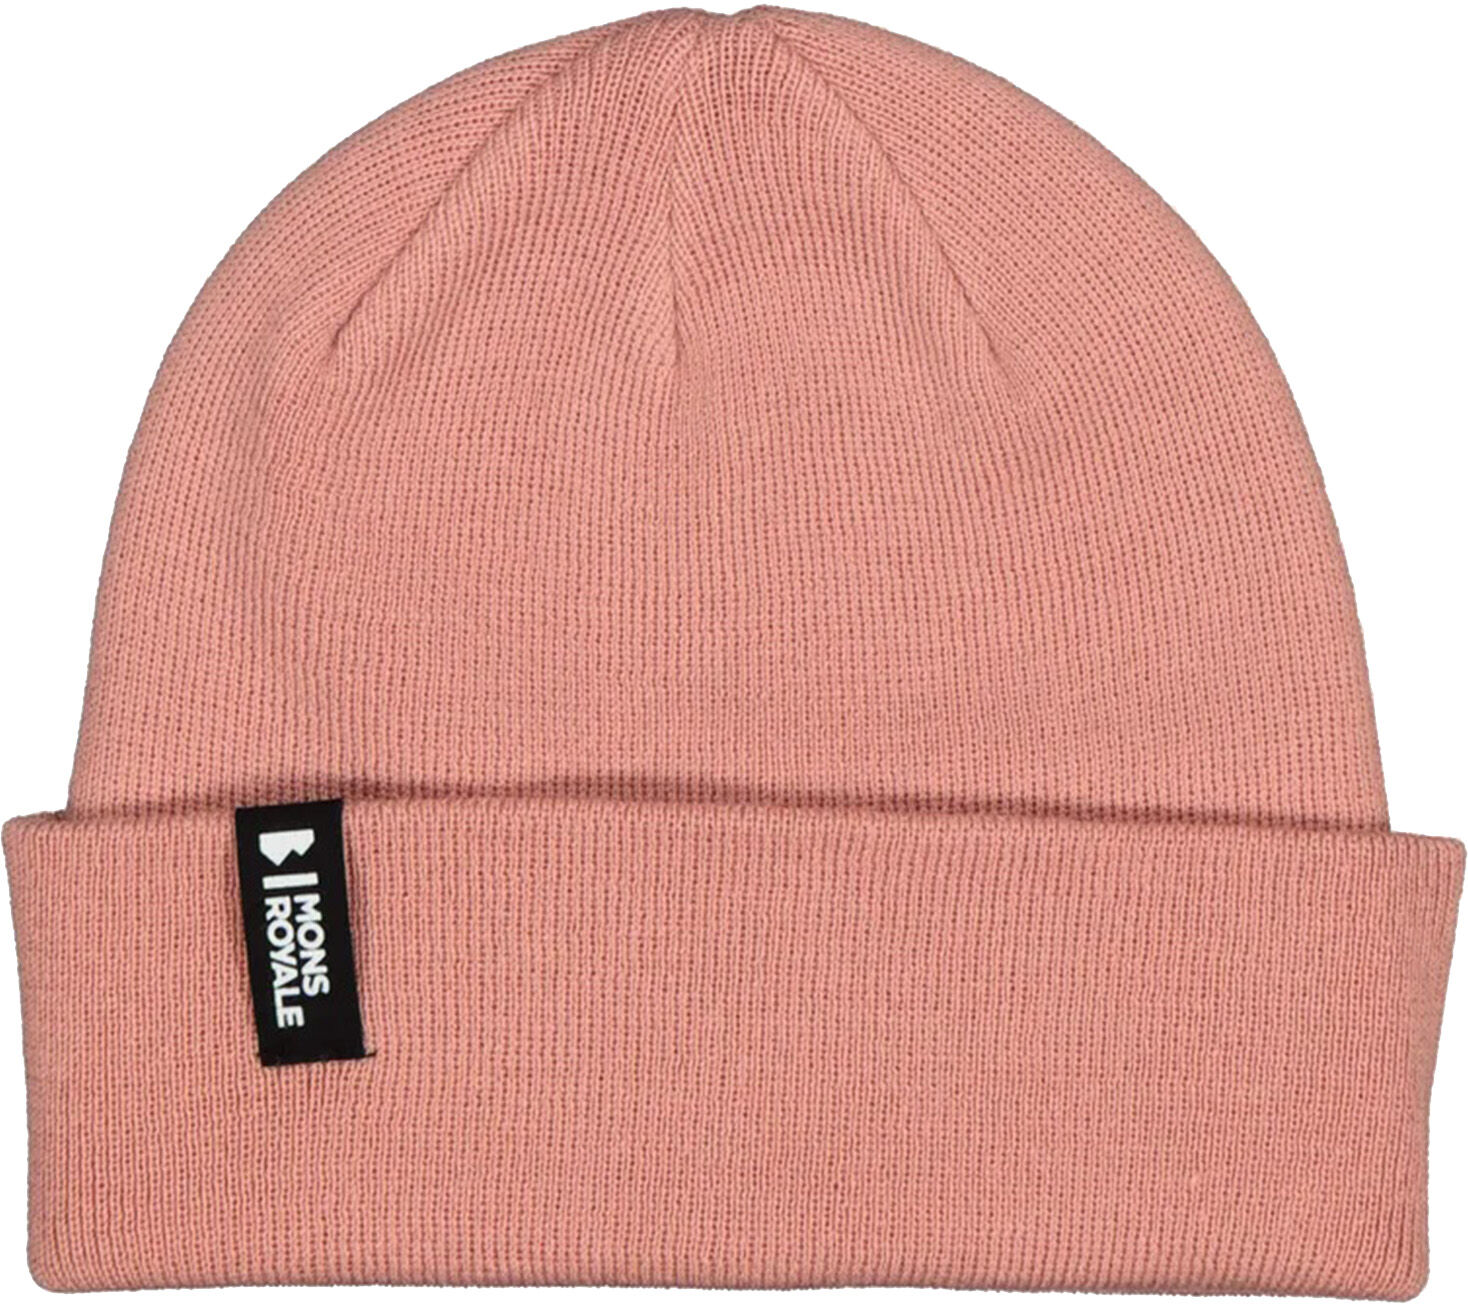 MONS ROYALE MCCLOUD BEANIE DUSTY PINK One Size